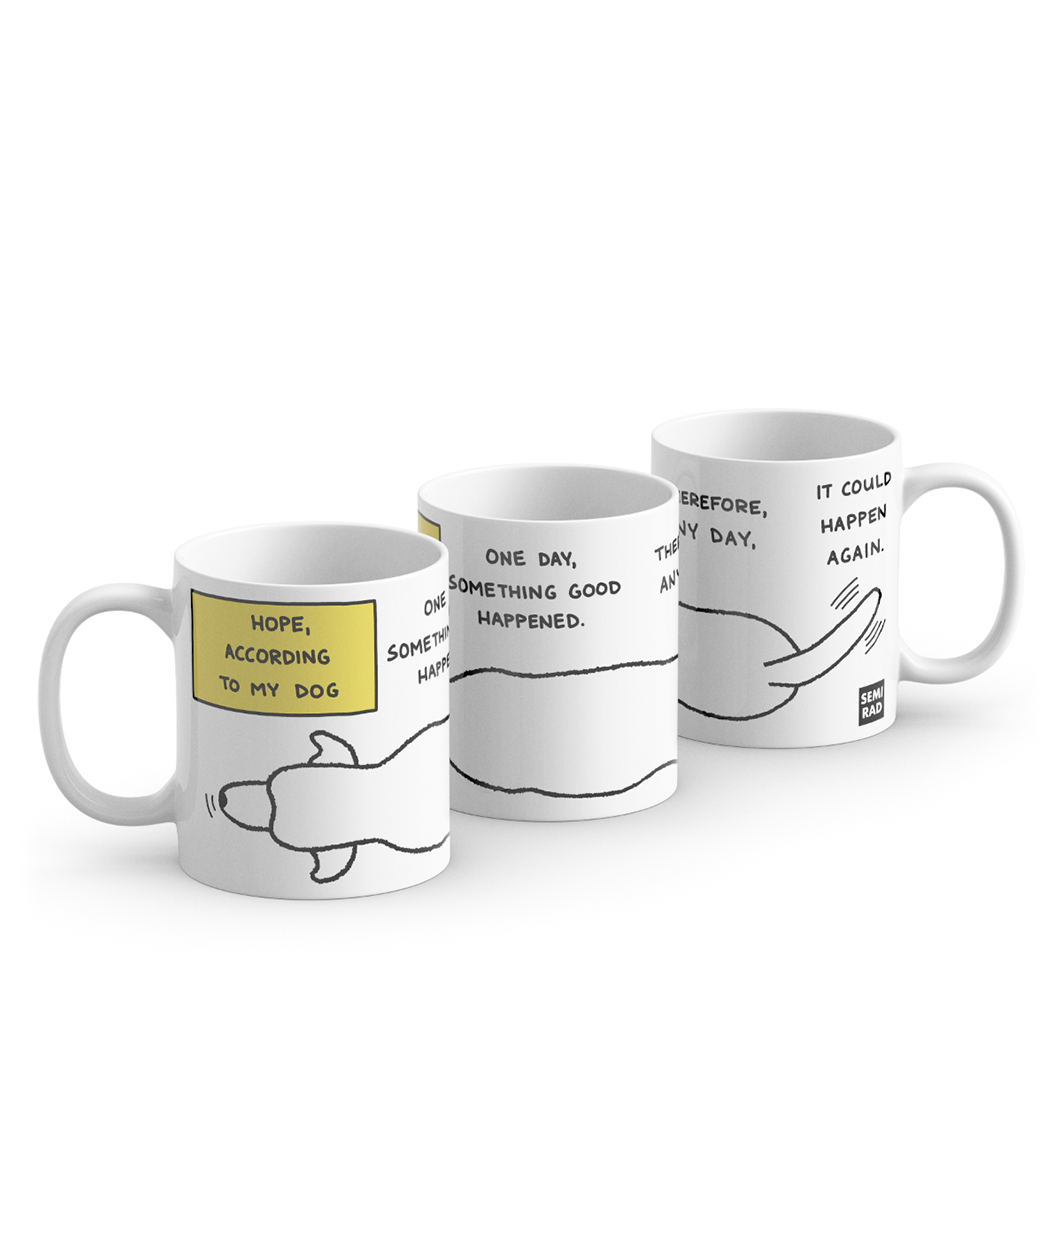 A line of three white mugs each showing a different portion of the same mug. There is an outline of a dog with text showing 